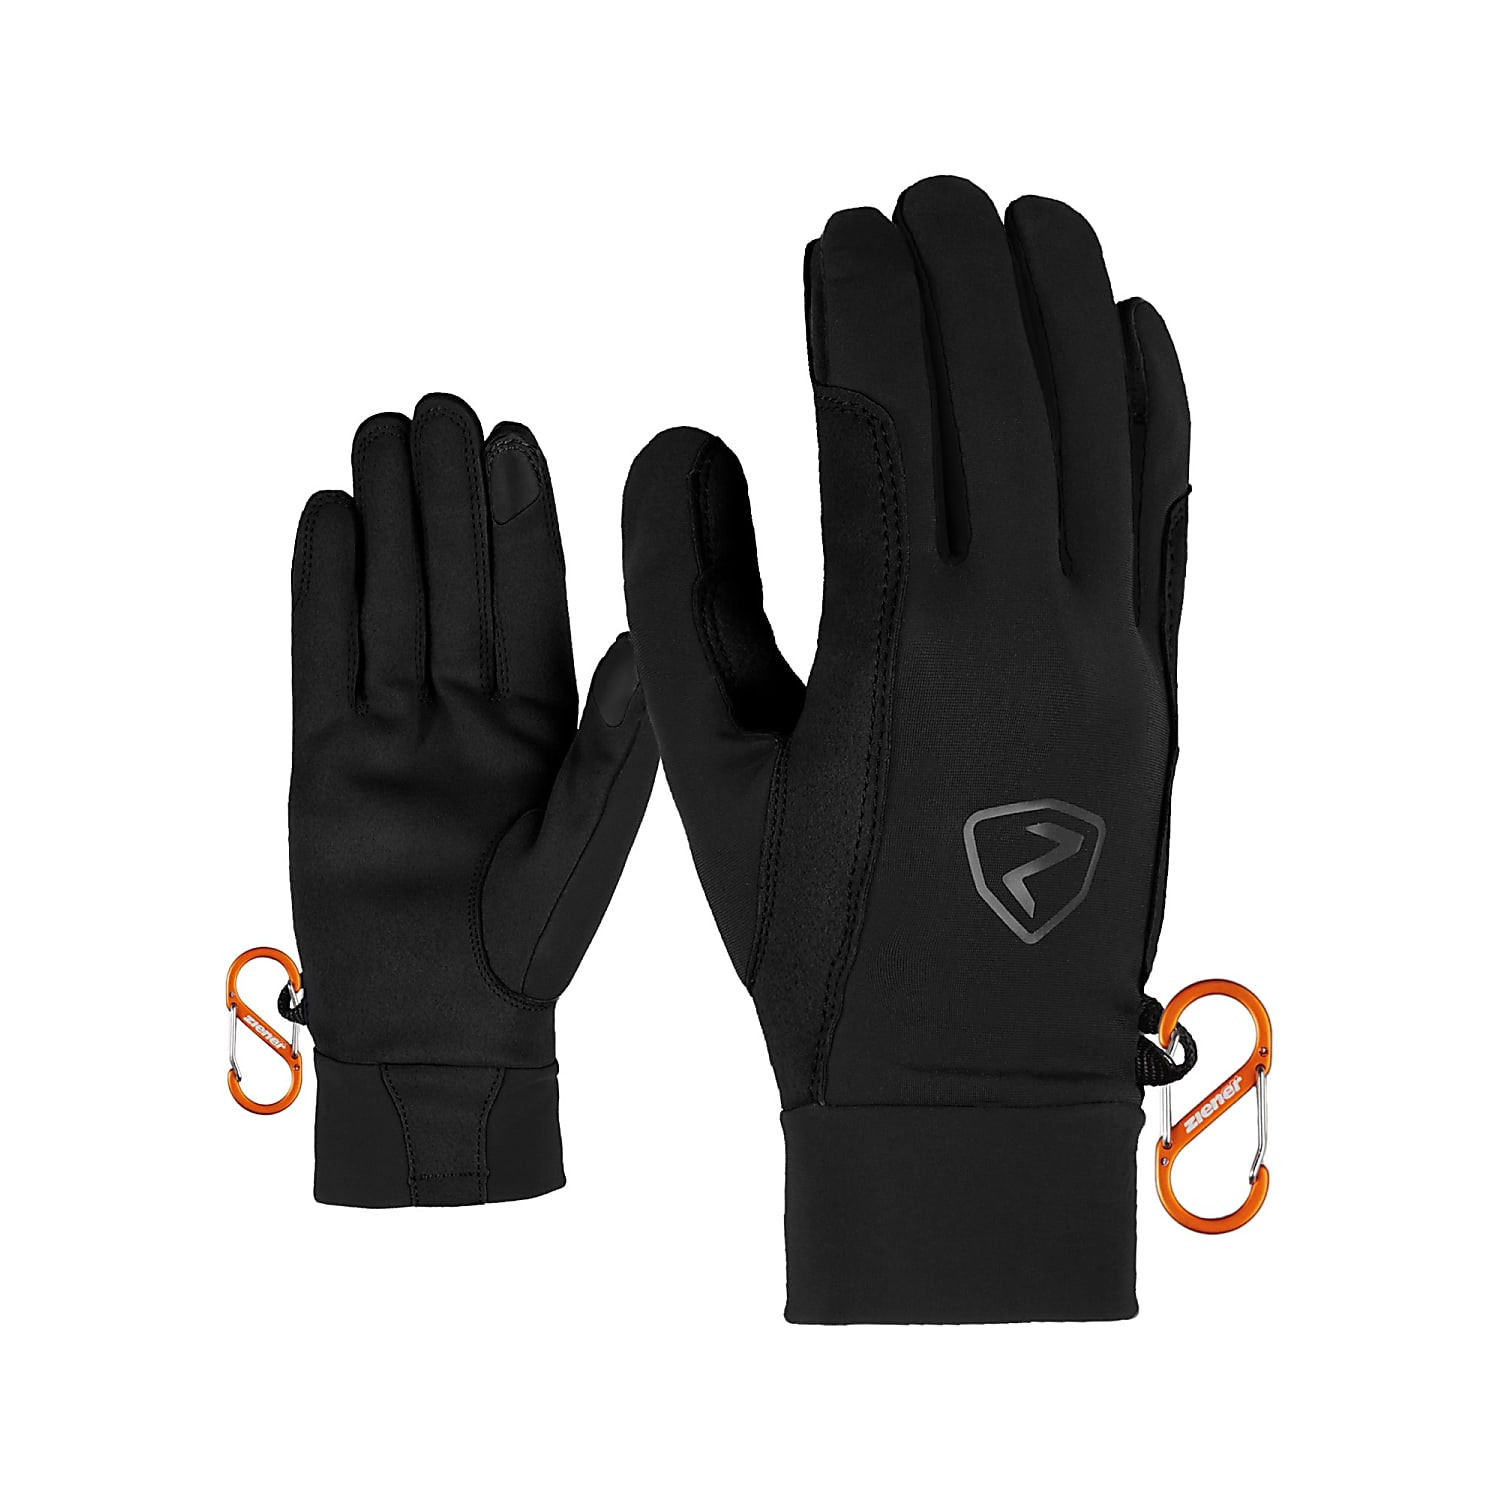 TOUCH GLOVE, and GUSTY Fast Ziener cheap Black shipping -